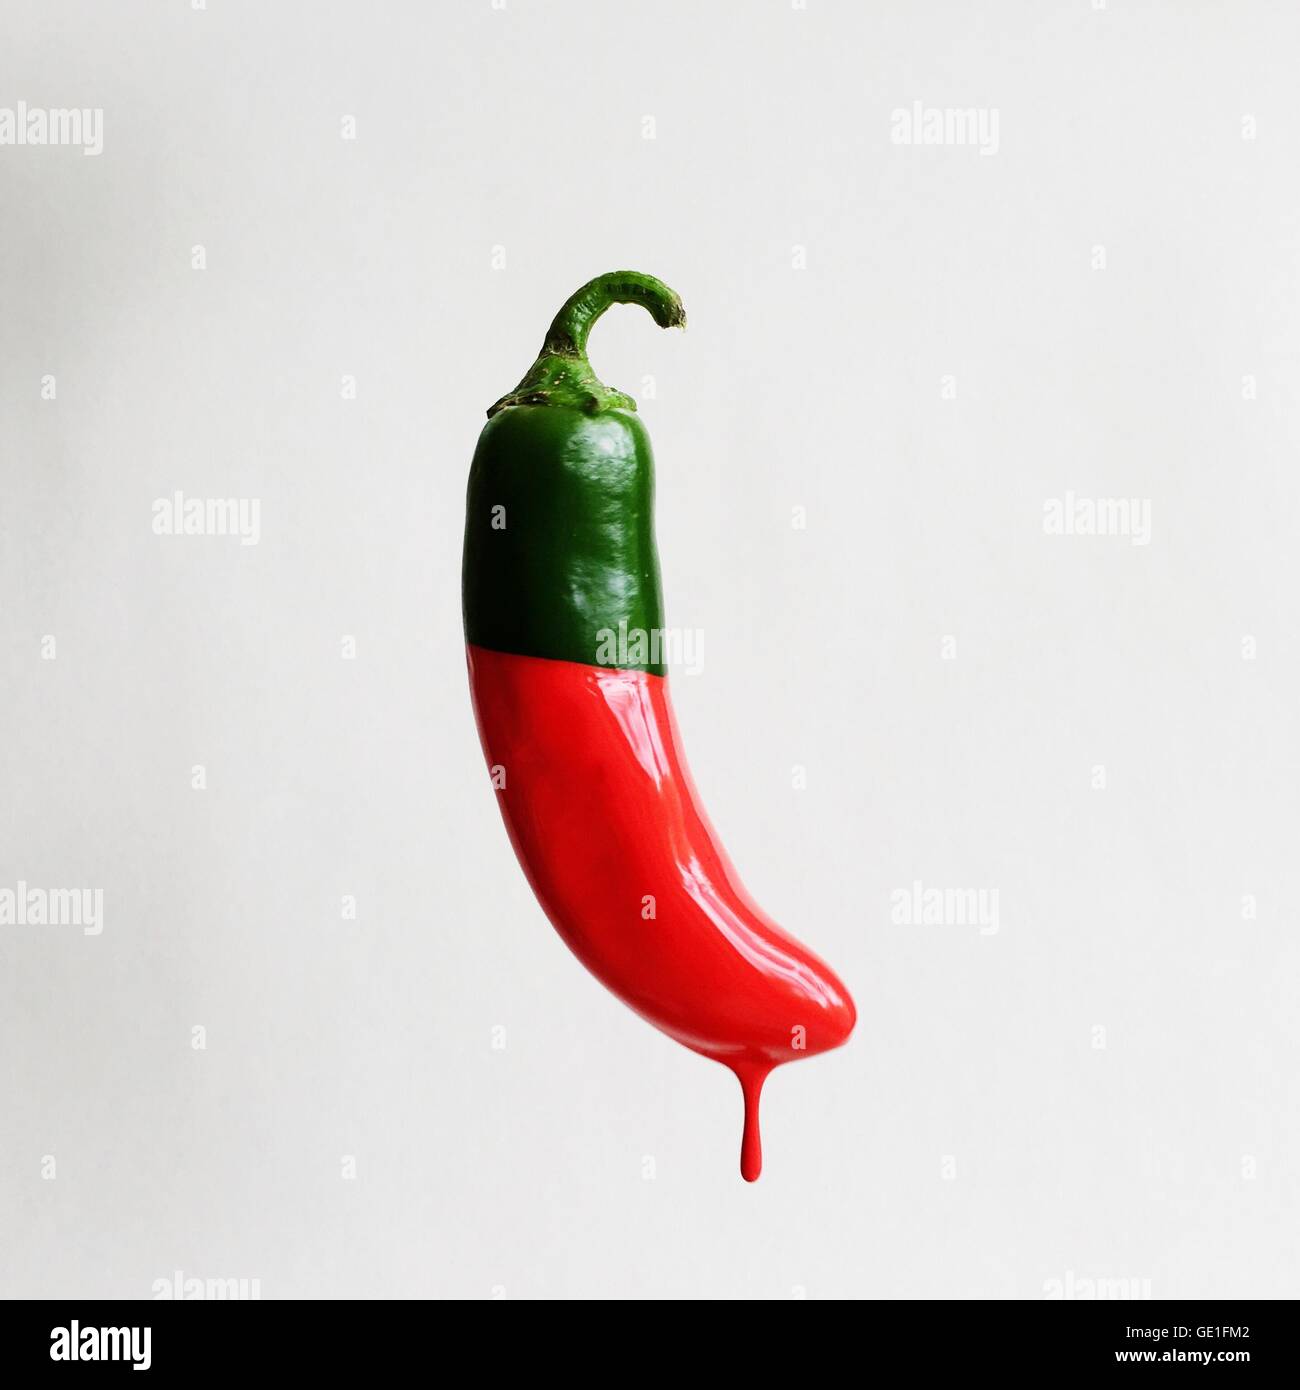 Green chill dipped in red paint Stock Photo